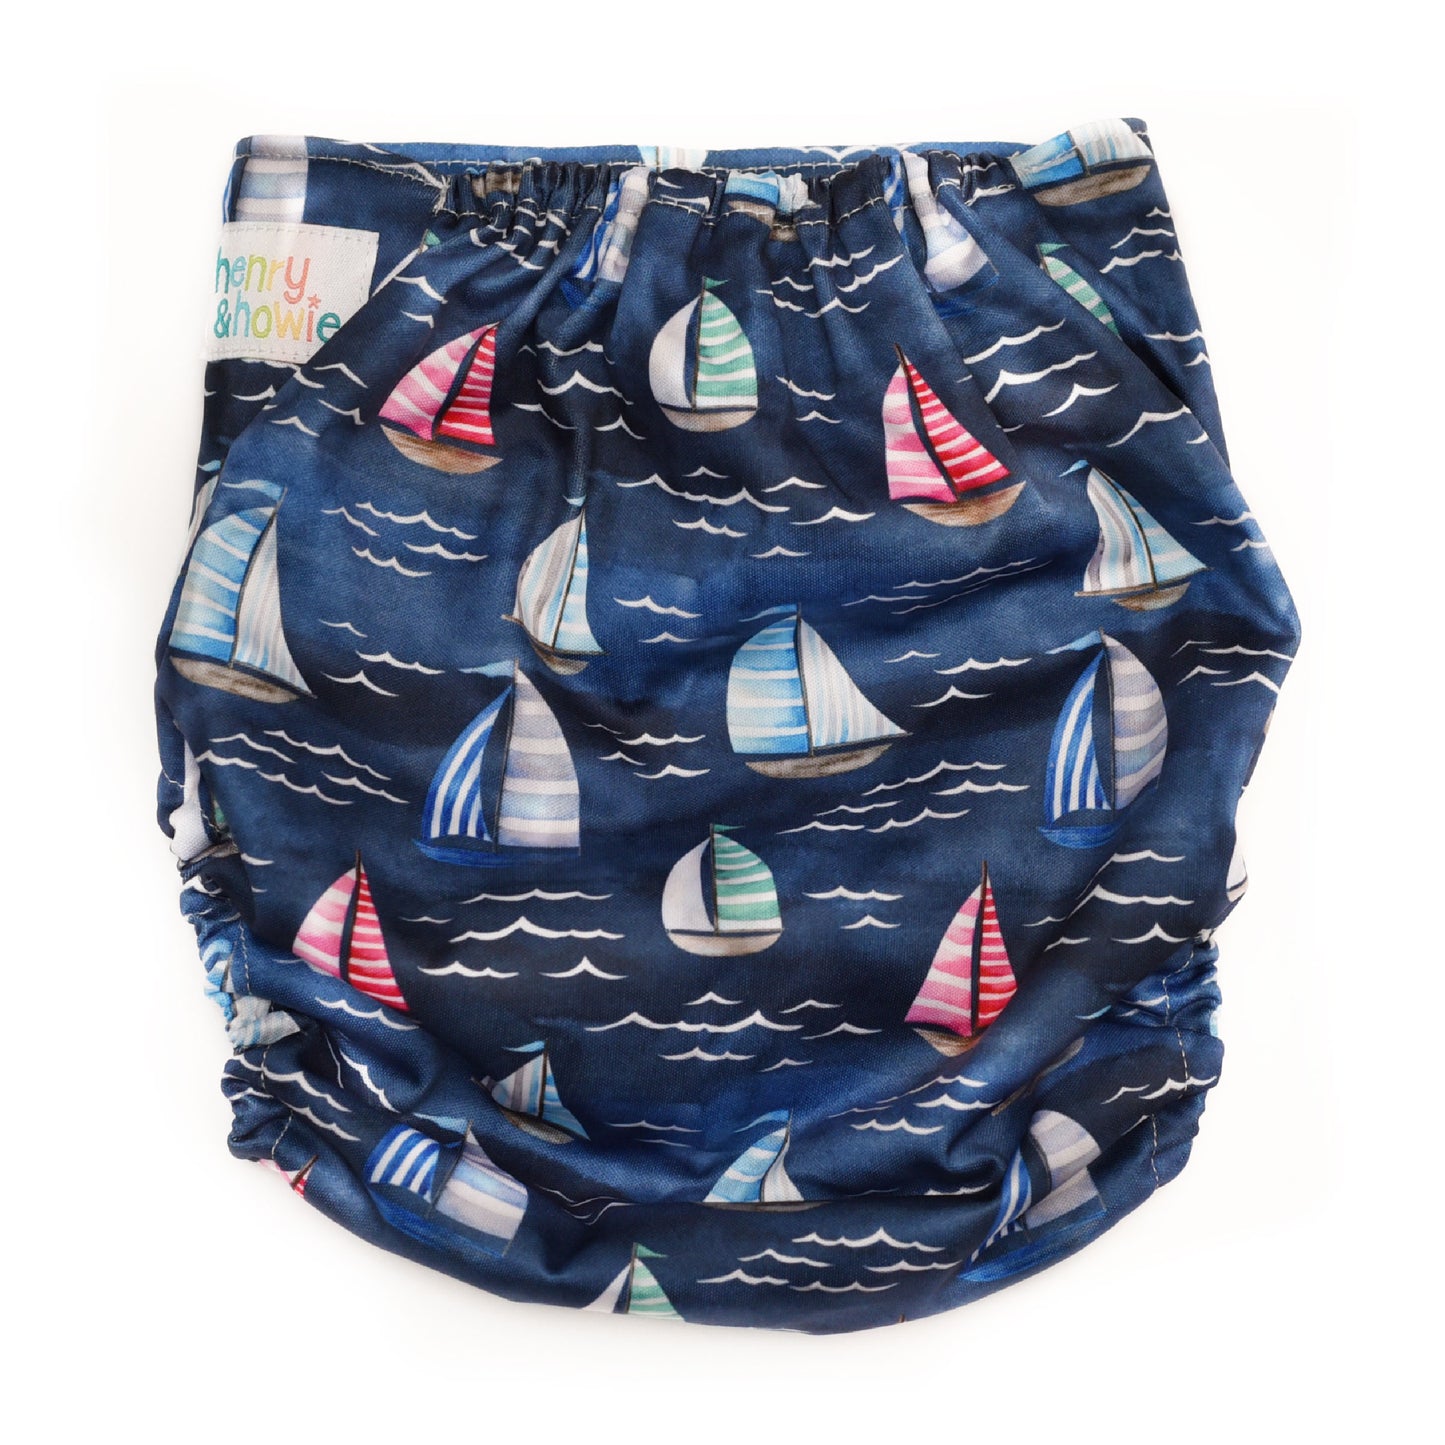 Smooth Sailing One Size Pocket Diaper